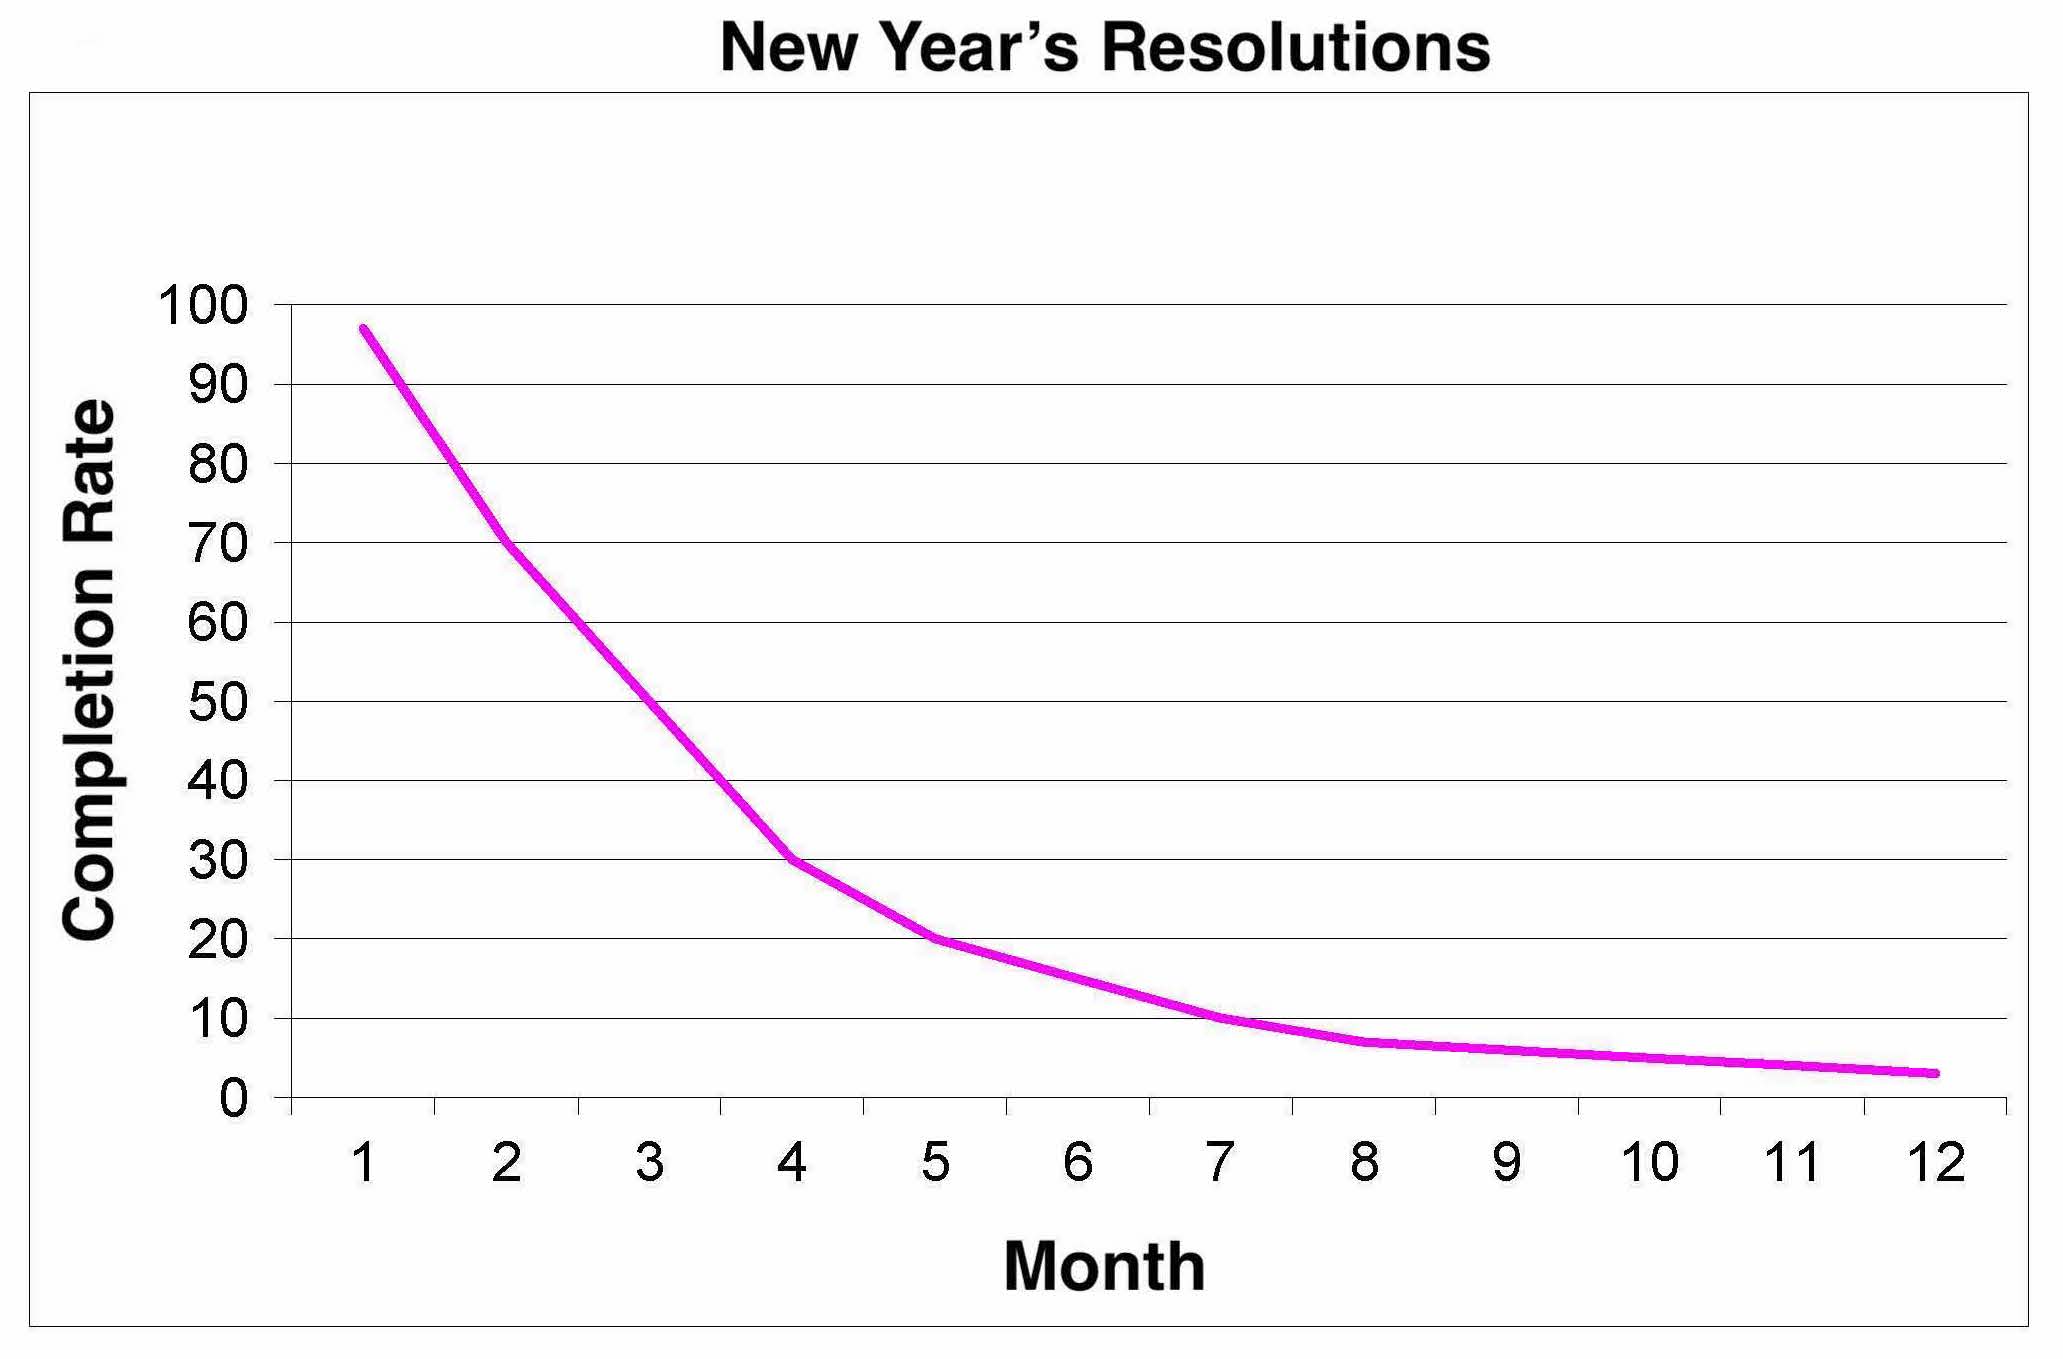 New Year's Resolution Completion Rates